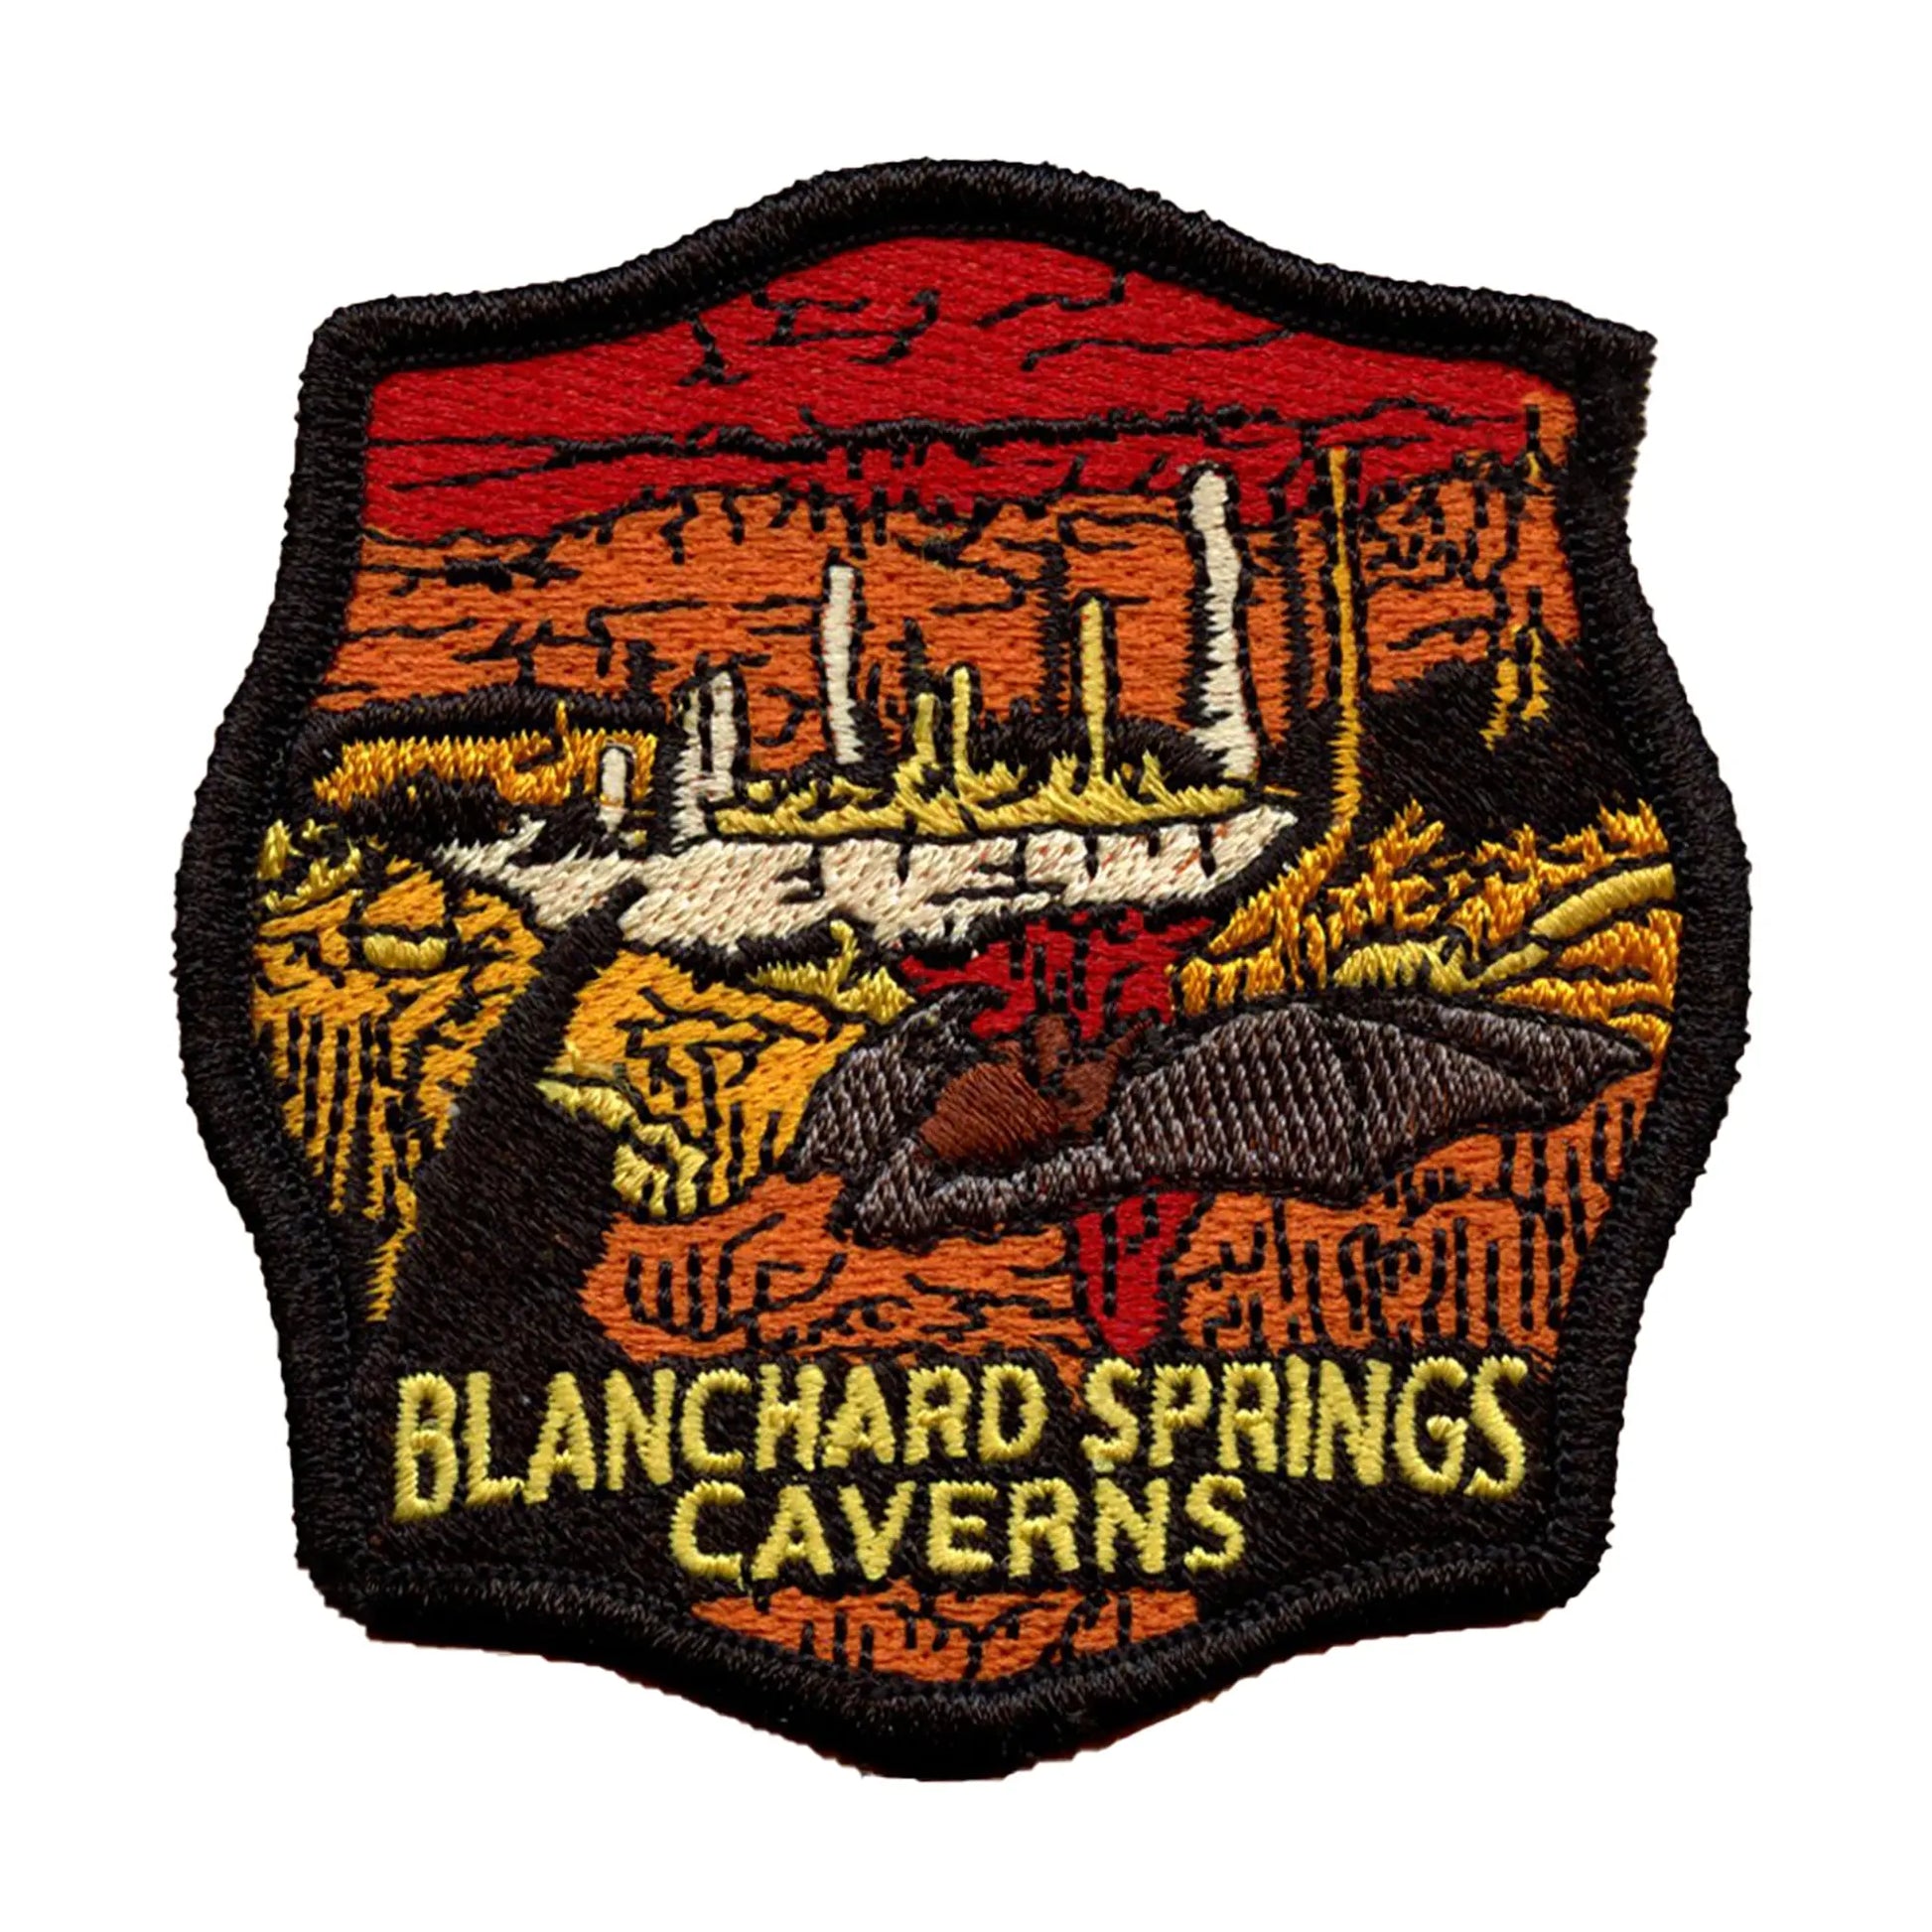 Blanchard Springs Caverns Patch Cave Forest Travel Embroidered Iron On